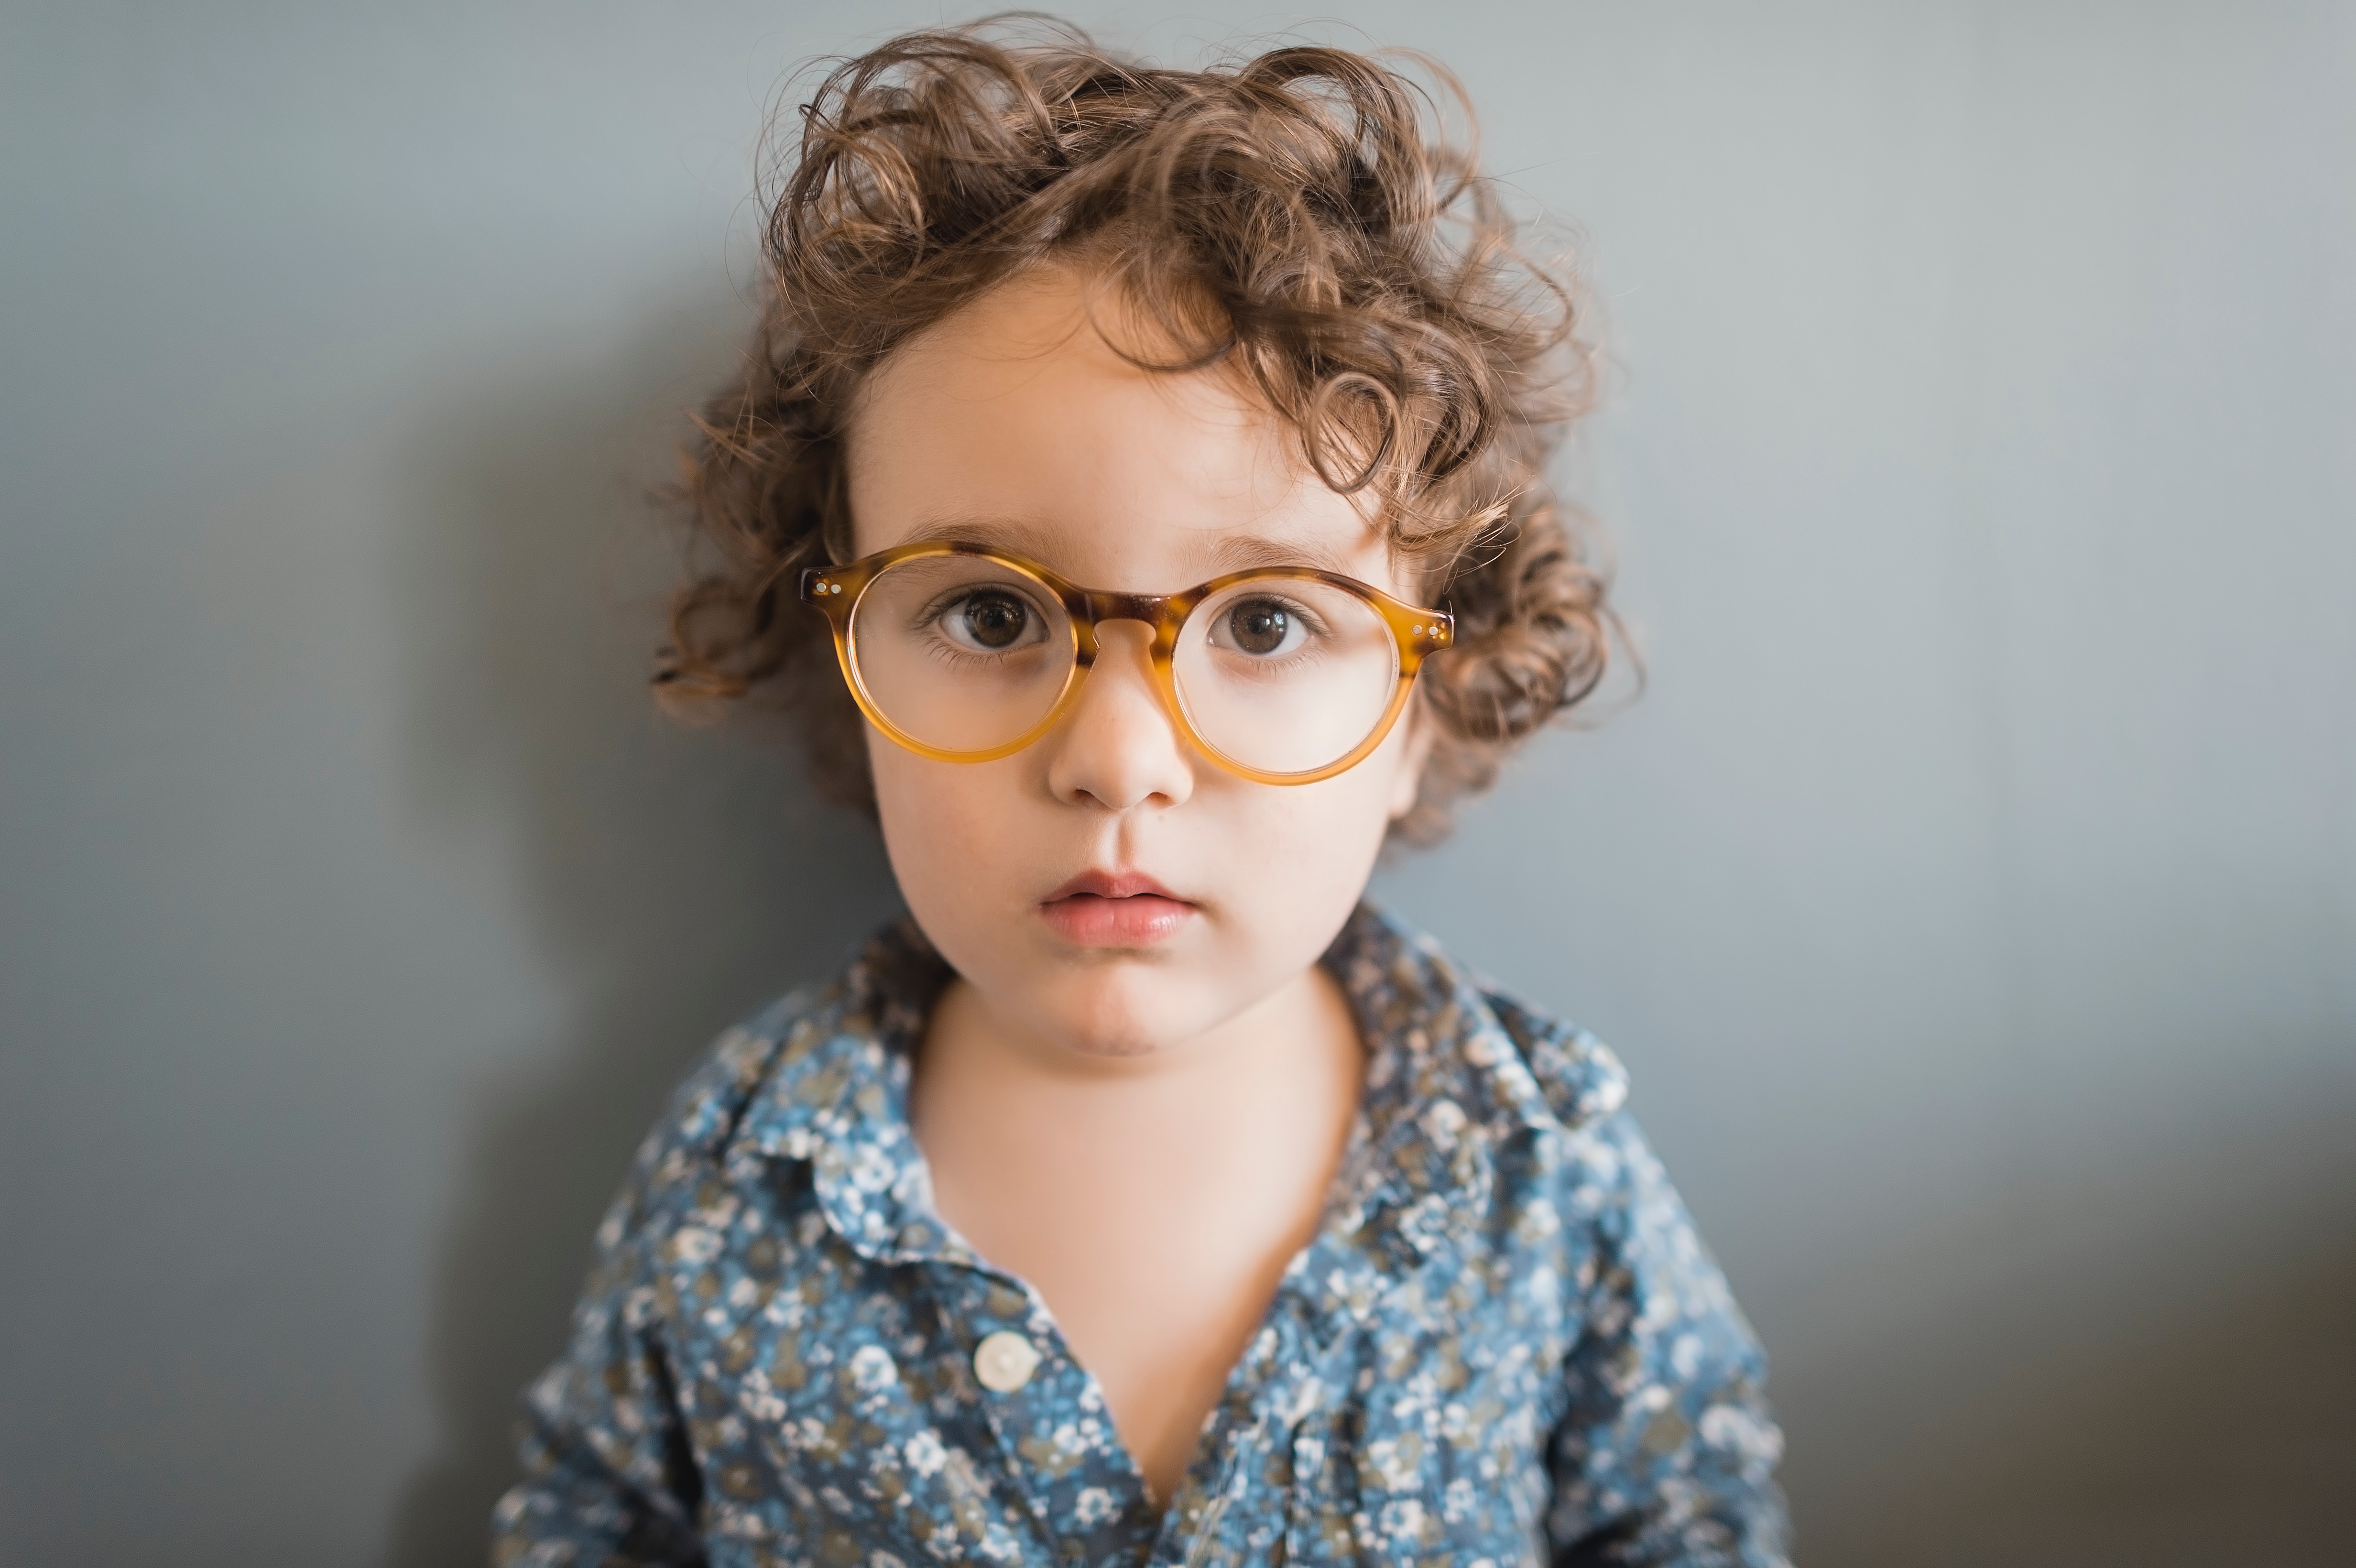 4928x3280 glasses, school, toddler wearing glasses, doctor, Free picture, boy, kid, confused, shirt, curly hair, hope, smart, toddles, glass Gallery HD Wallpaper